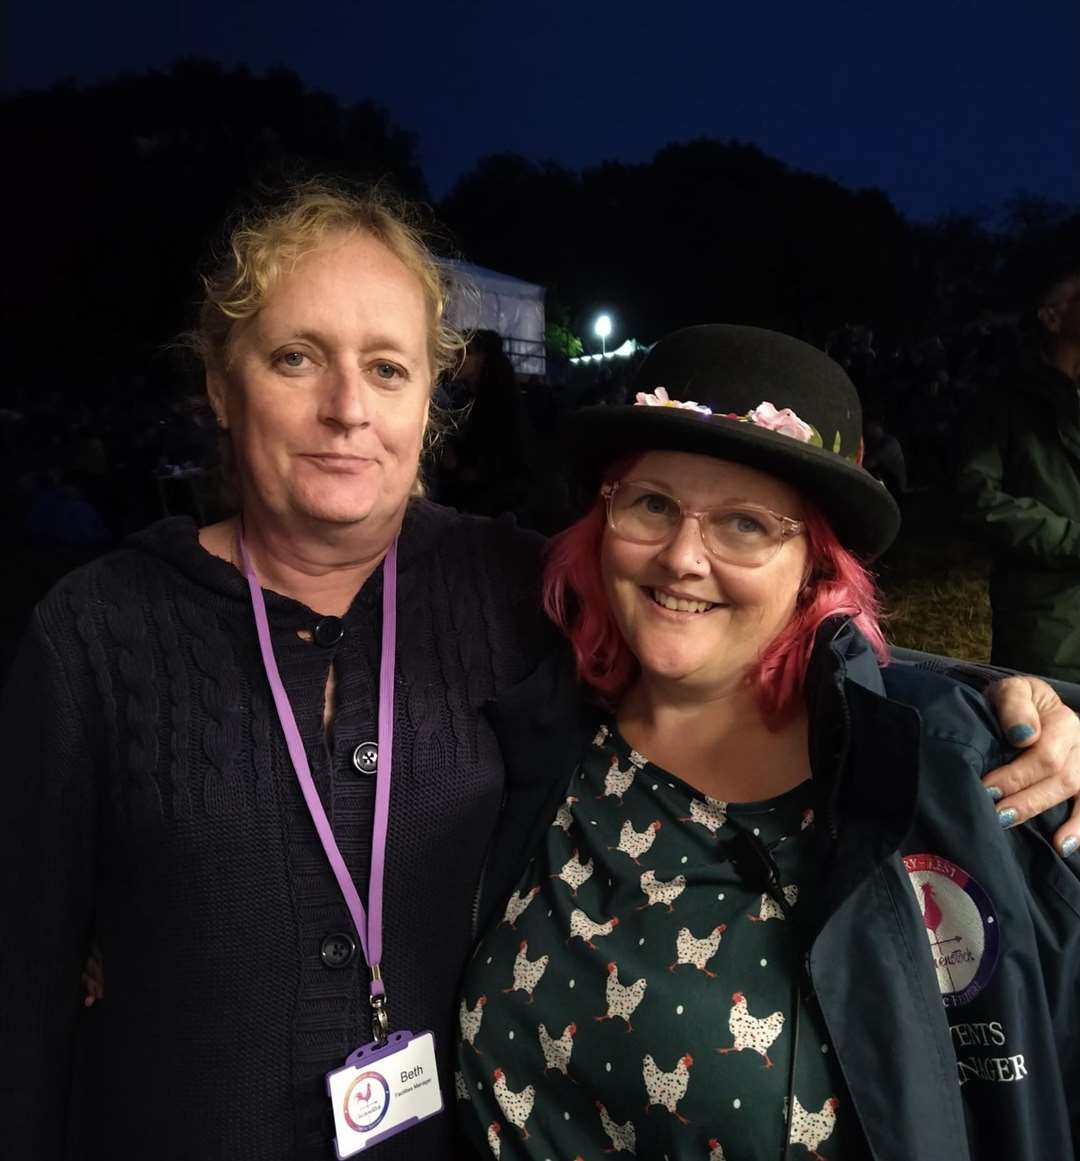 Chickenstock organisers Beth and Moya Taylor at their Stockbury music festival. Picture: Richard Thompstone